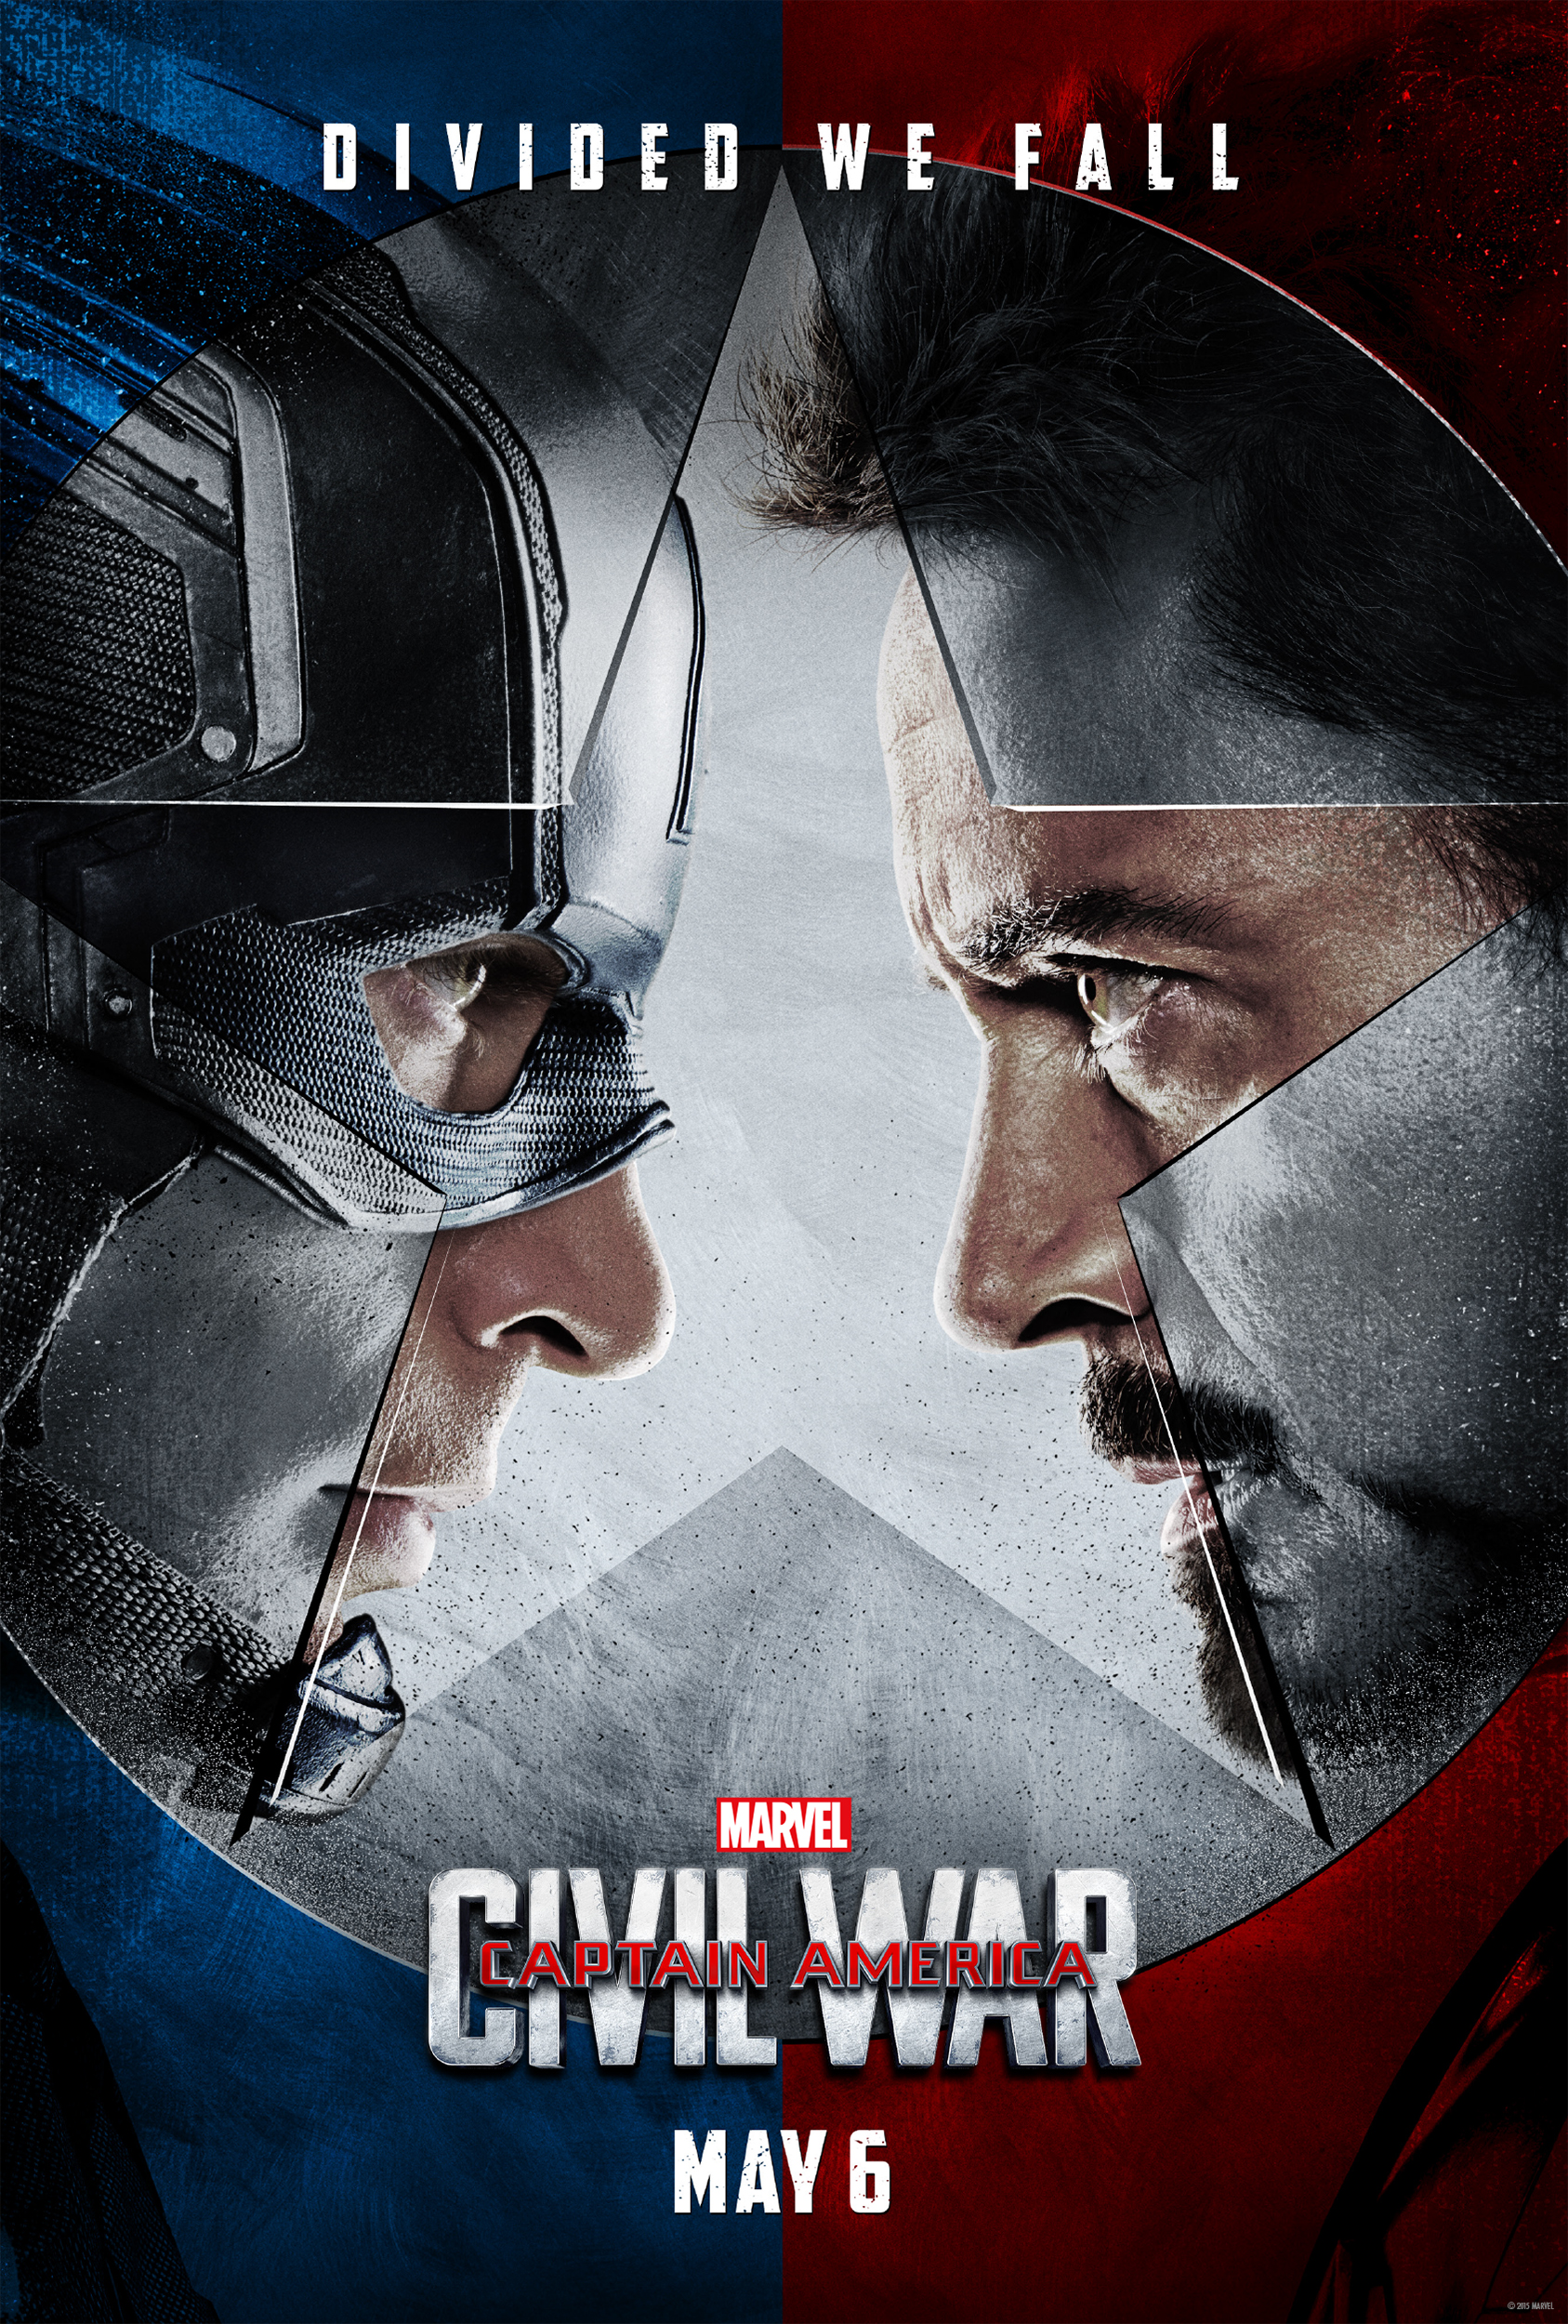 http://vignette3.wikia.nocookie.net/marvelcinematicuniverse/images/9/9b/CW_Poster_01.png/revision/latest?cb=20151125065655